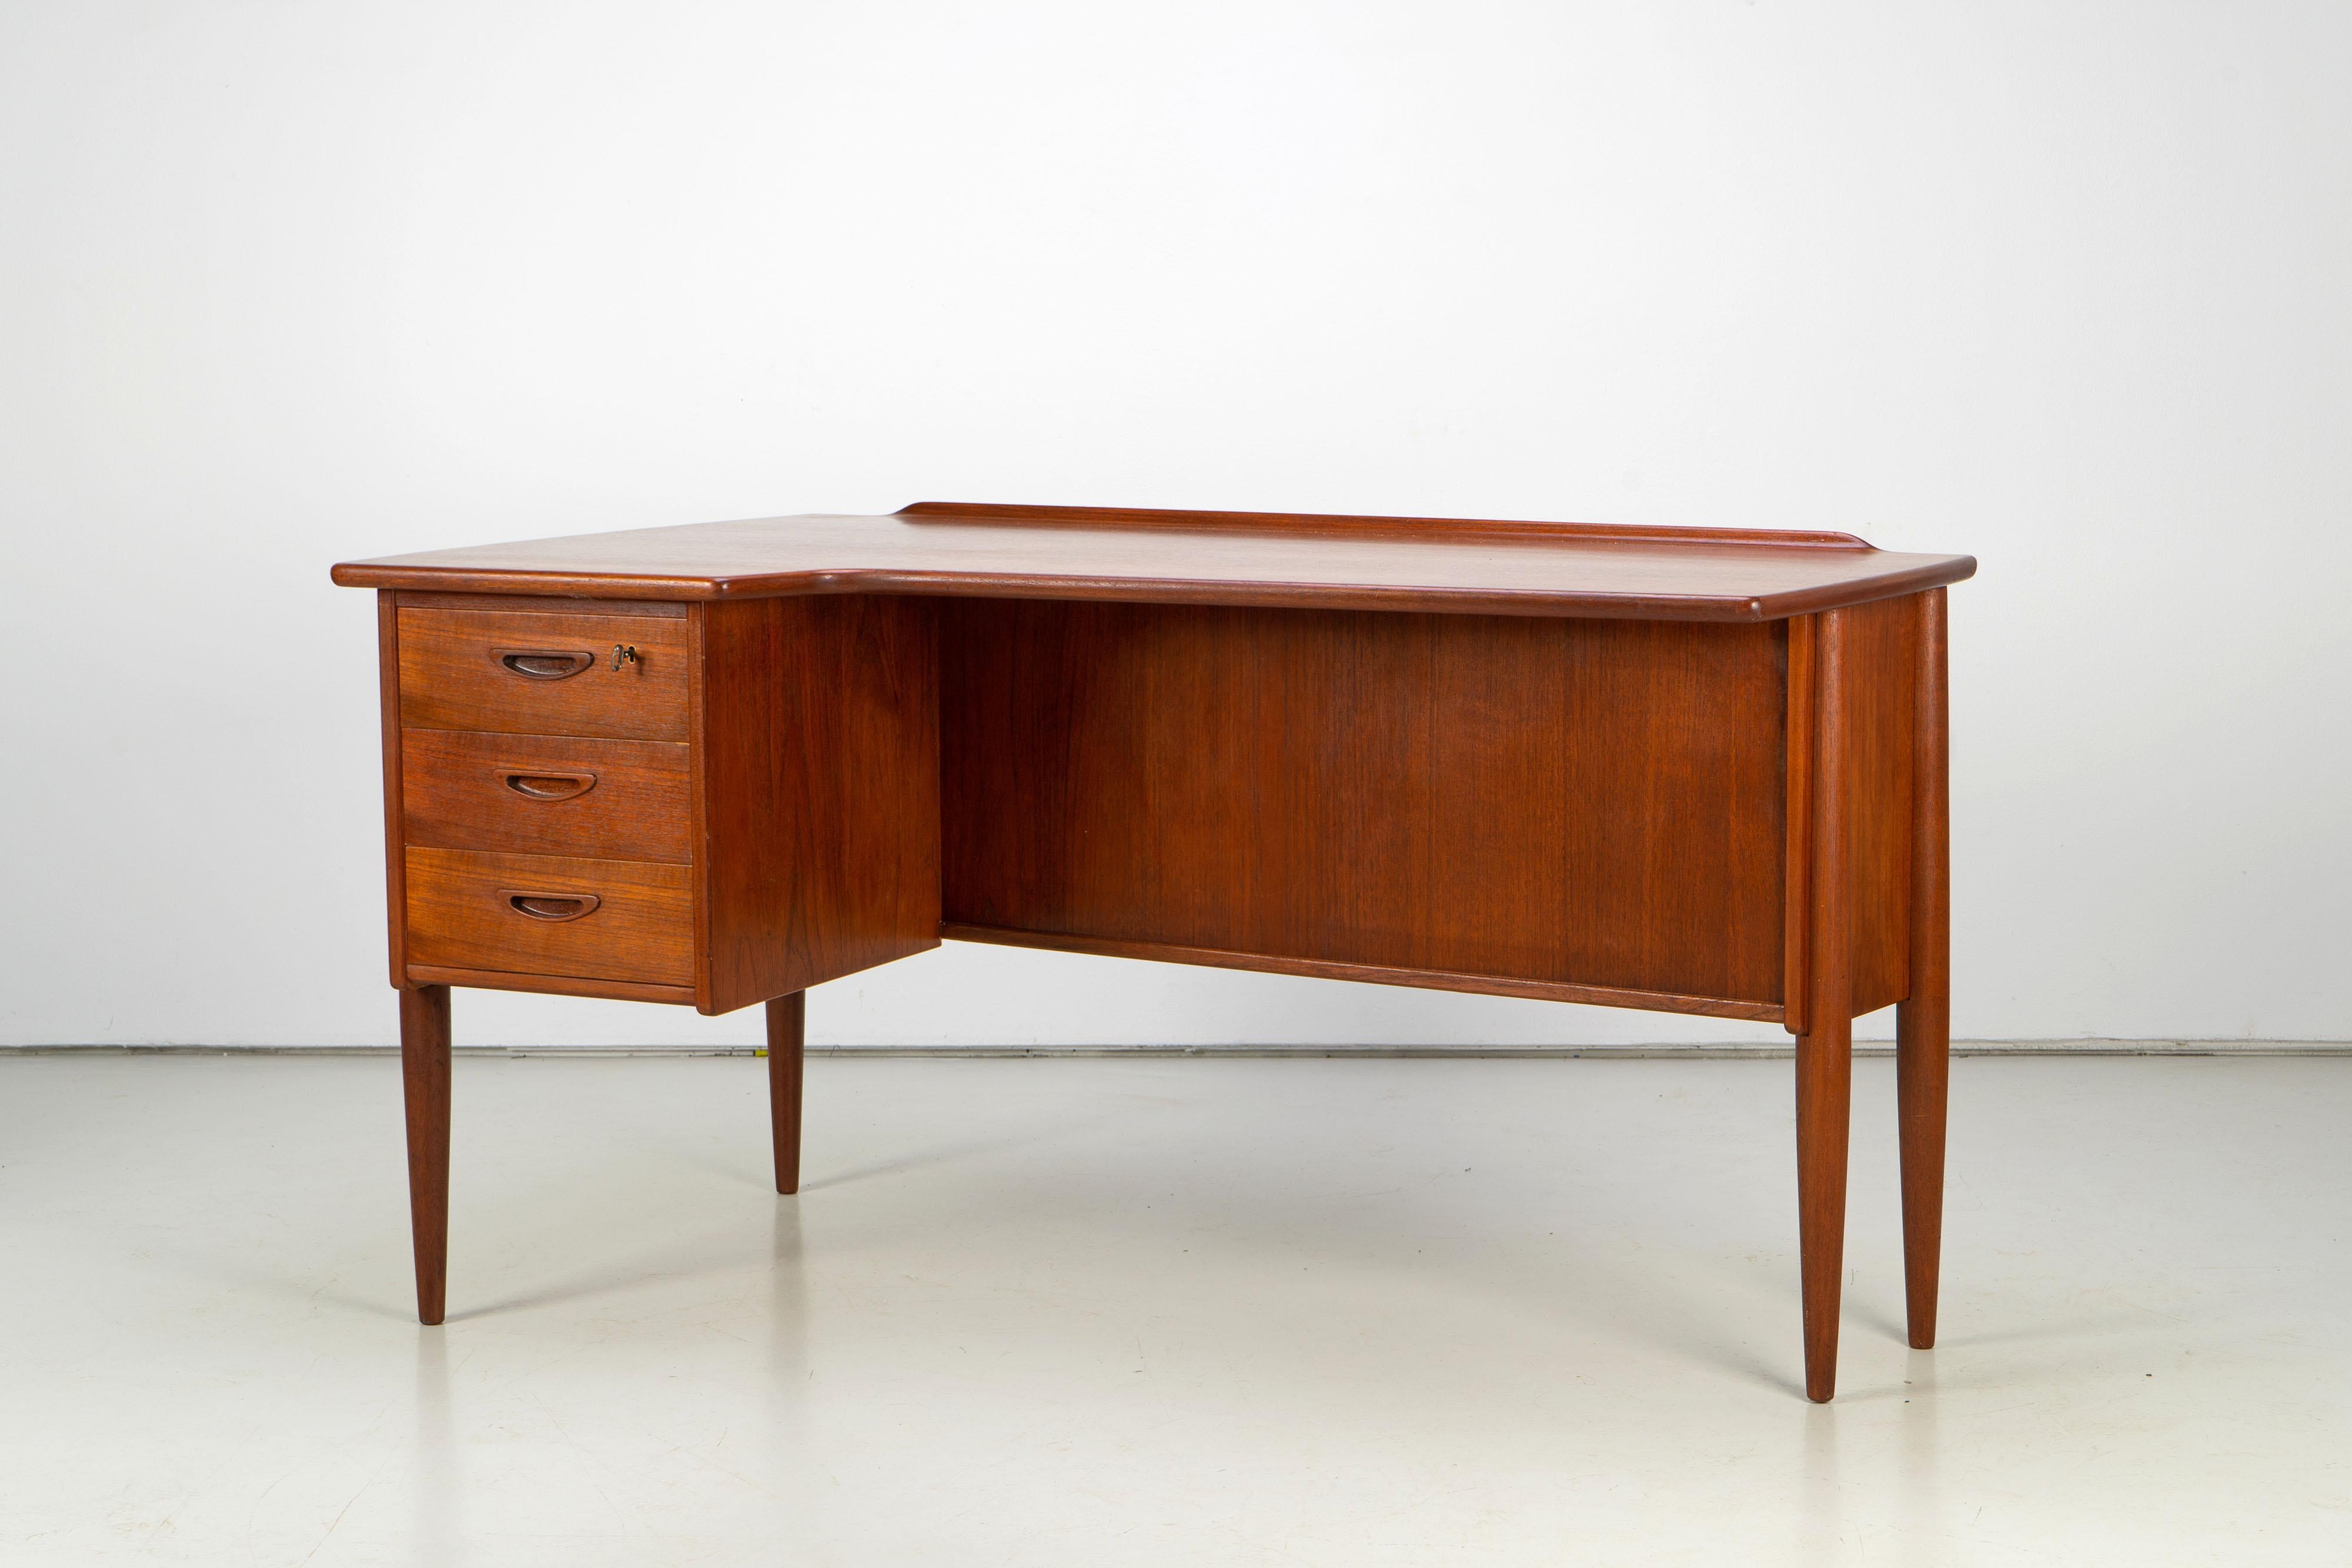 Scandinavian Modern desk made by Lelangs Mobelfabrik in the 1960s. This stunningly shaped desk had been refinished and in great condition.